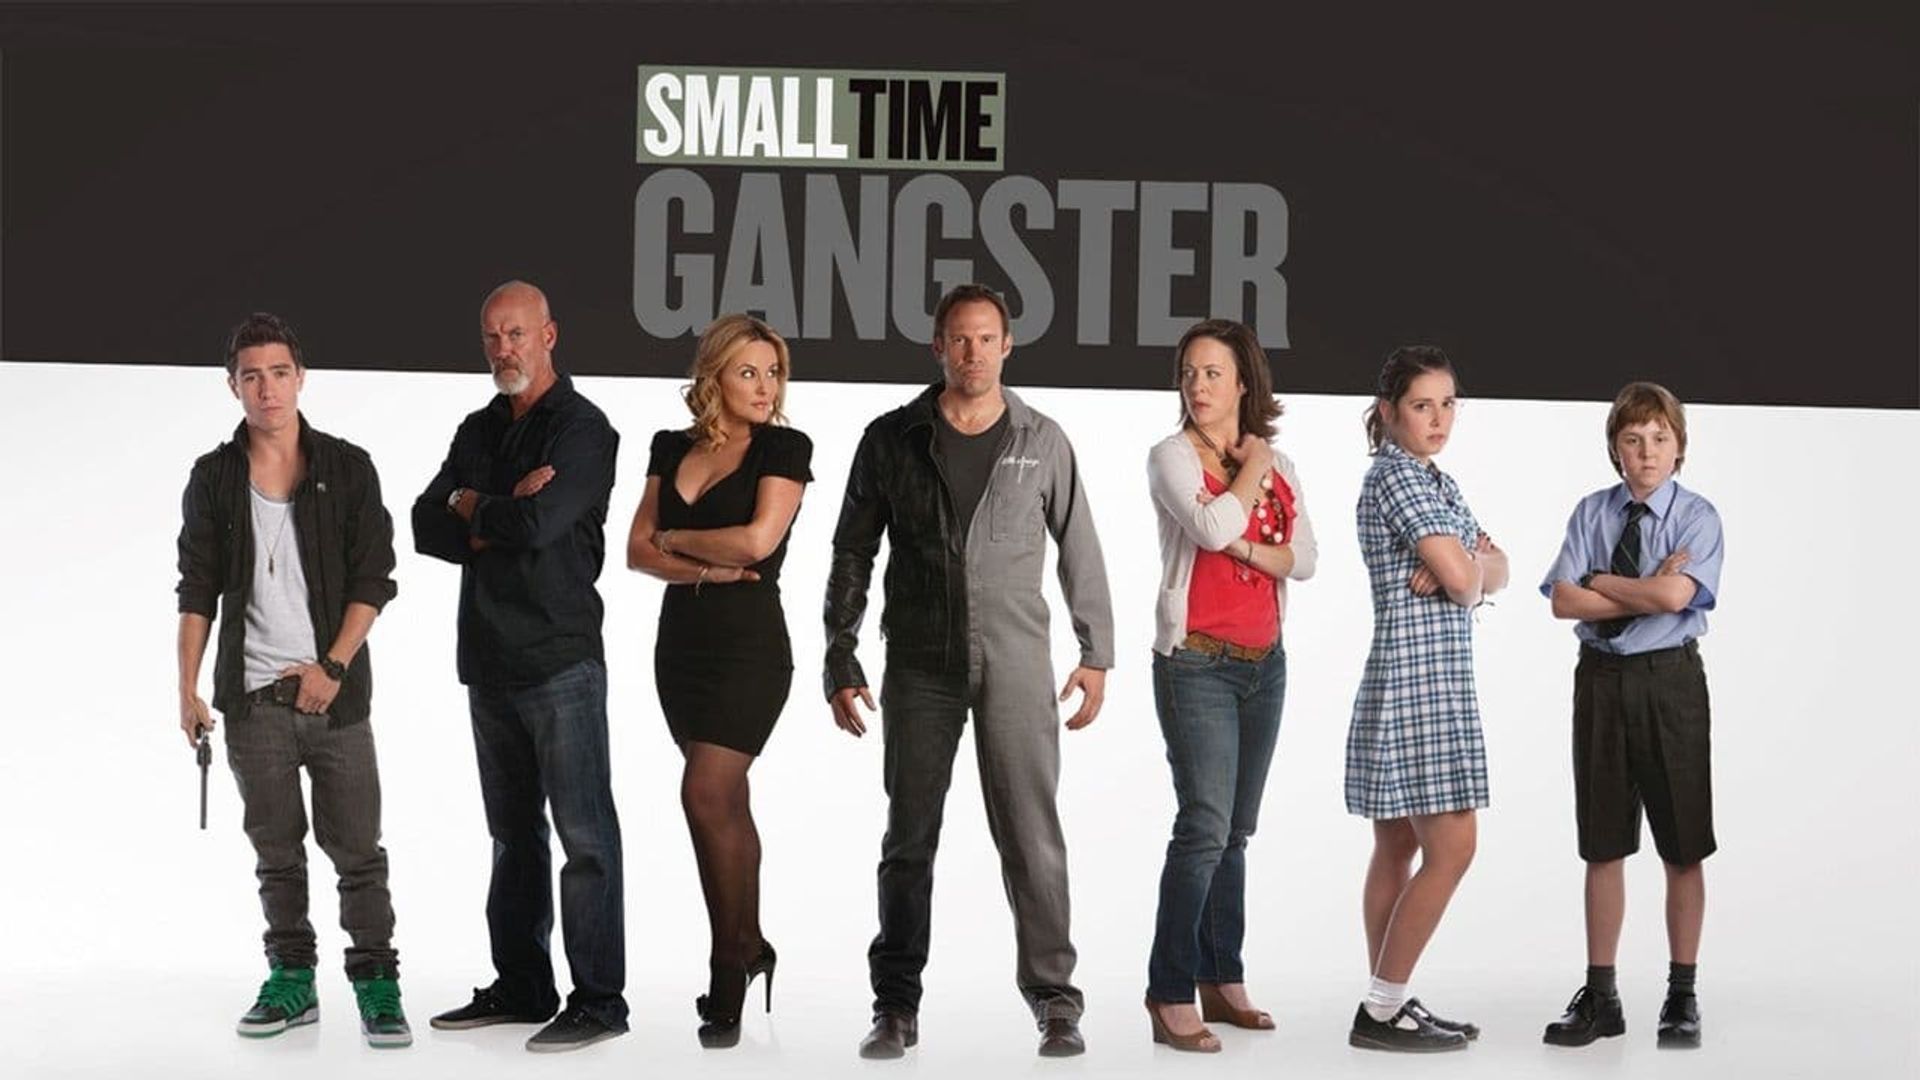 Small Time Gangster background